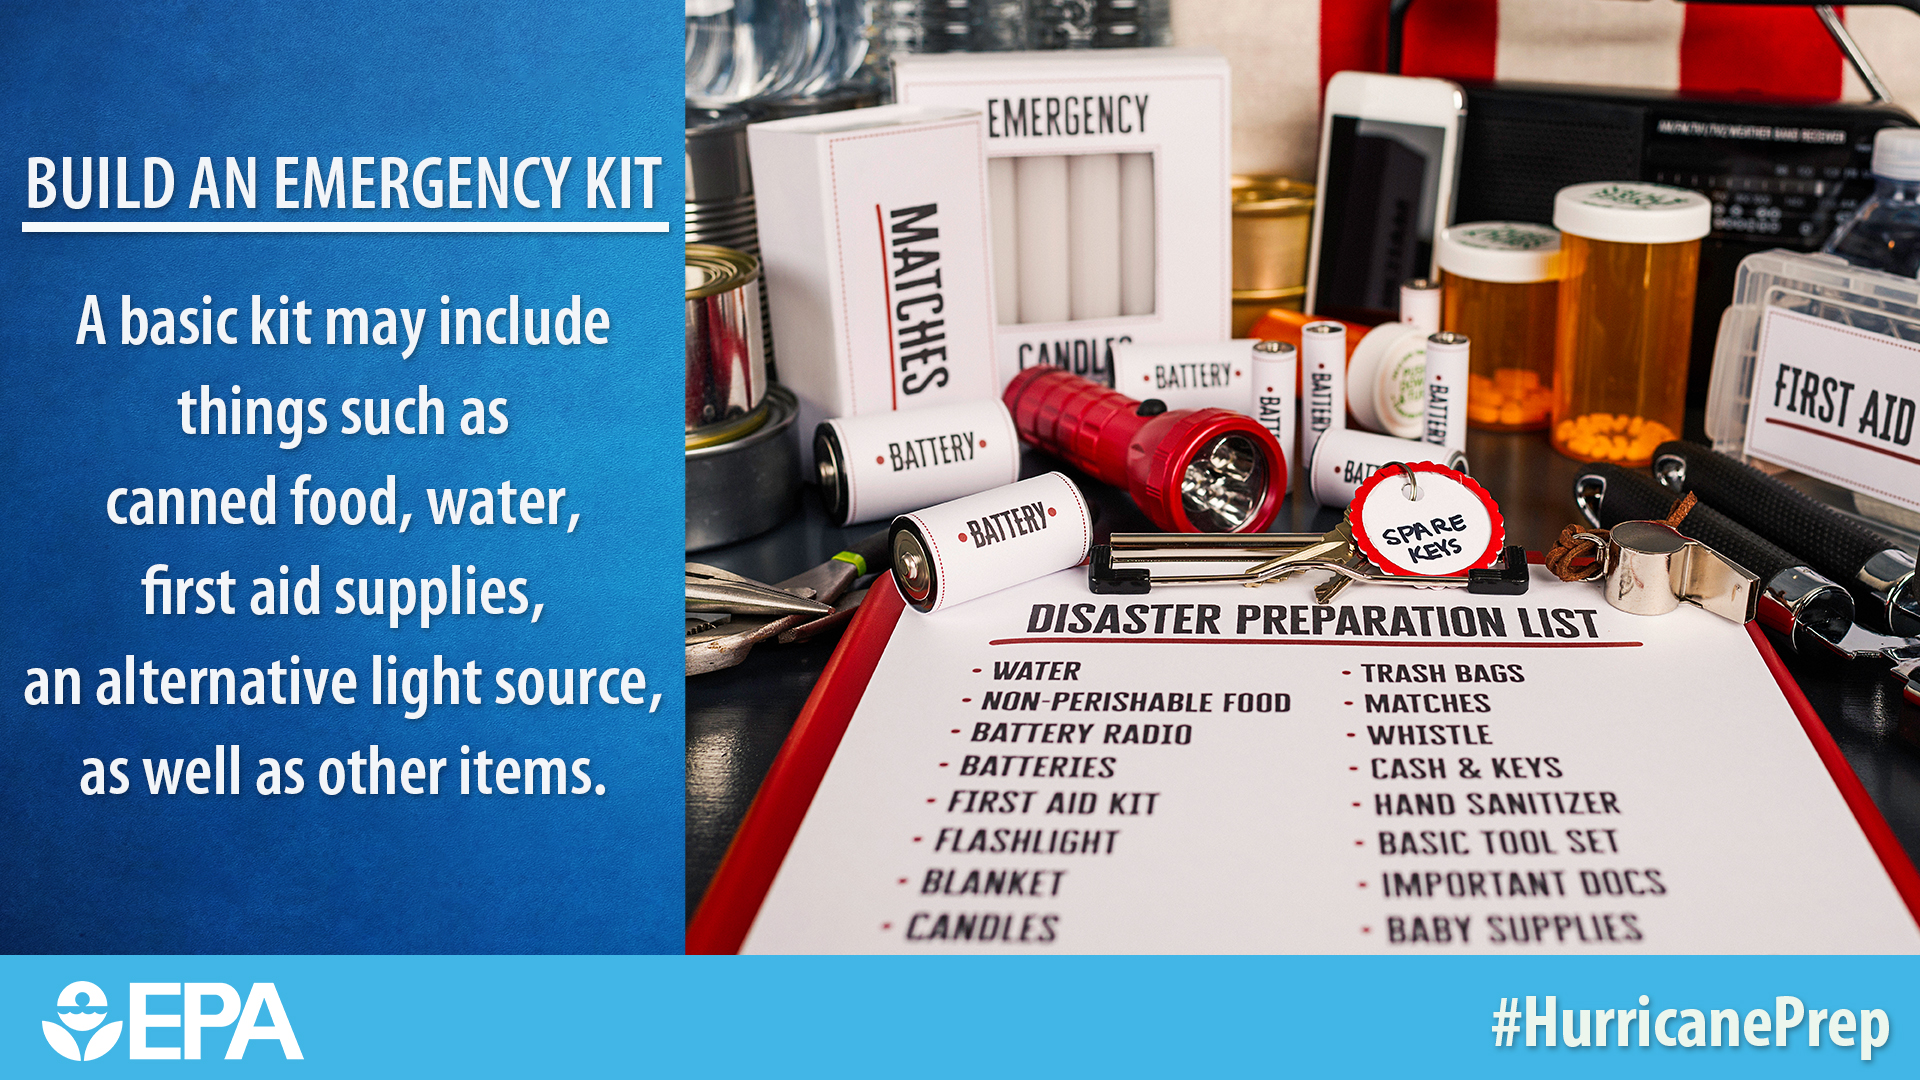 Build an emergency kit. A basic kit may include things such as canned food, water, first aid supplies, an alternative light source, as well as other items.